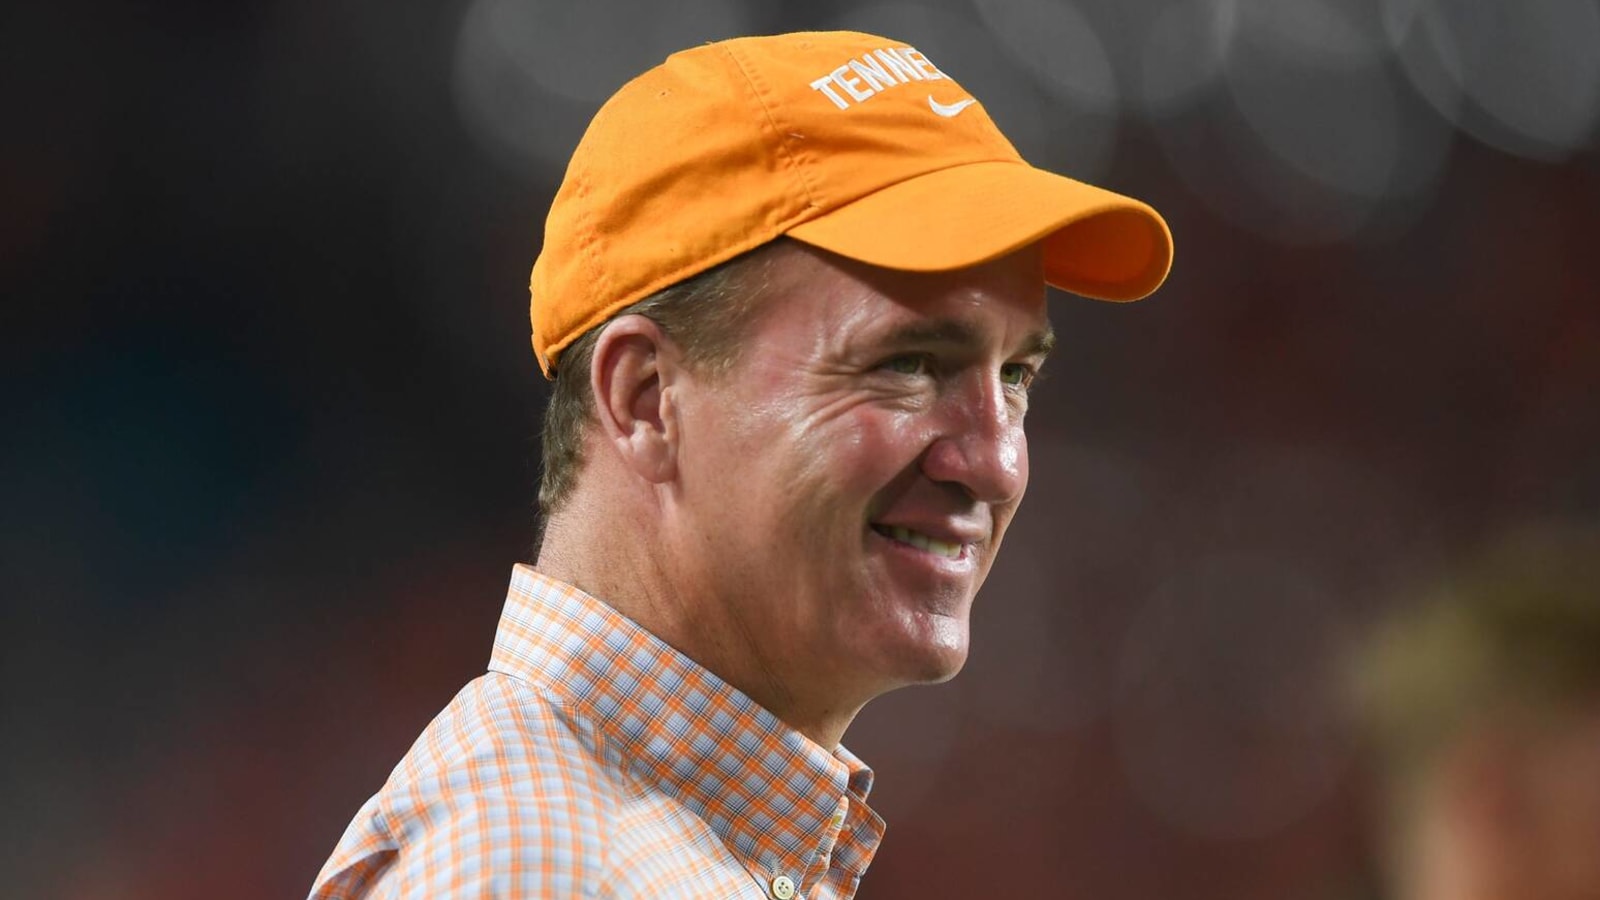 Manning brothers' comments on 'halftime adjustments' cause uproar